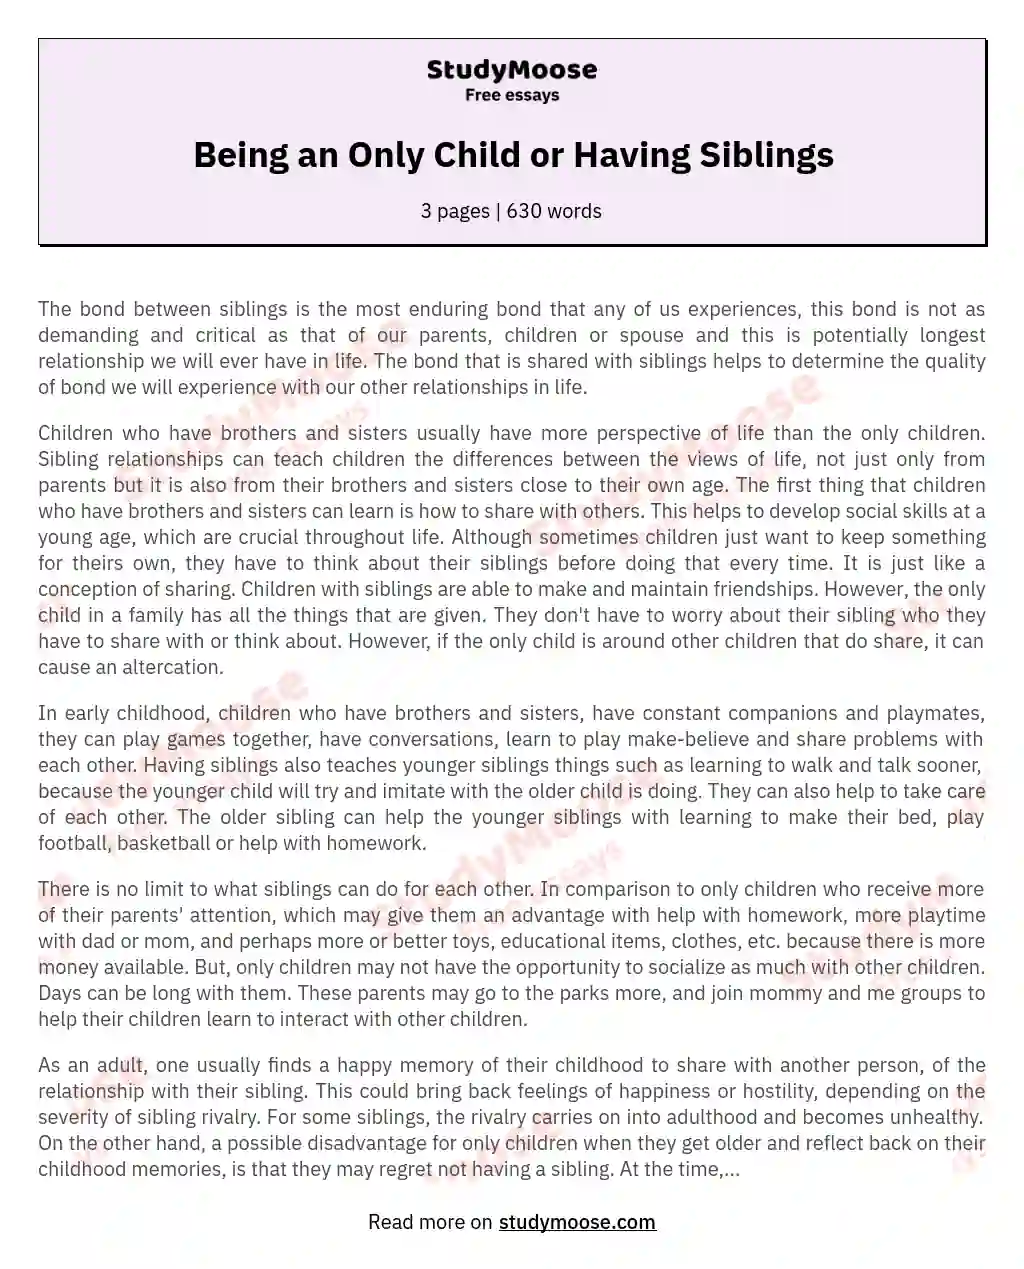 Being an Only Child or Having Siblings essay